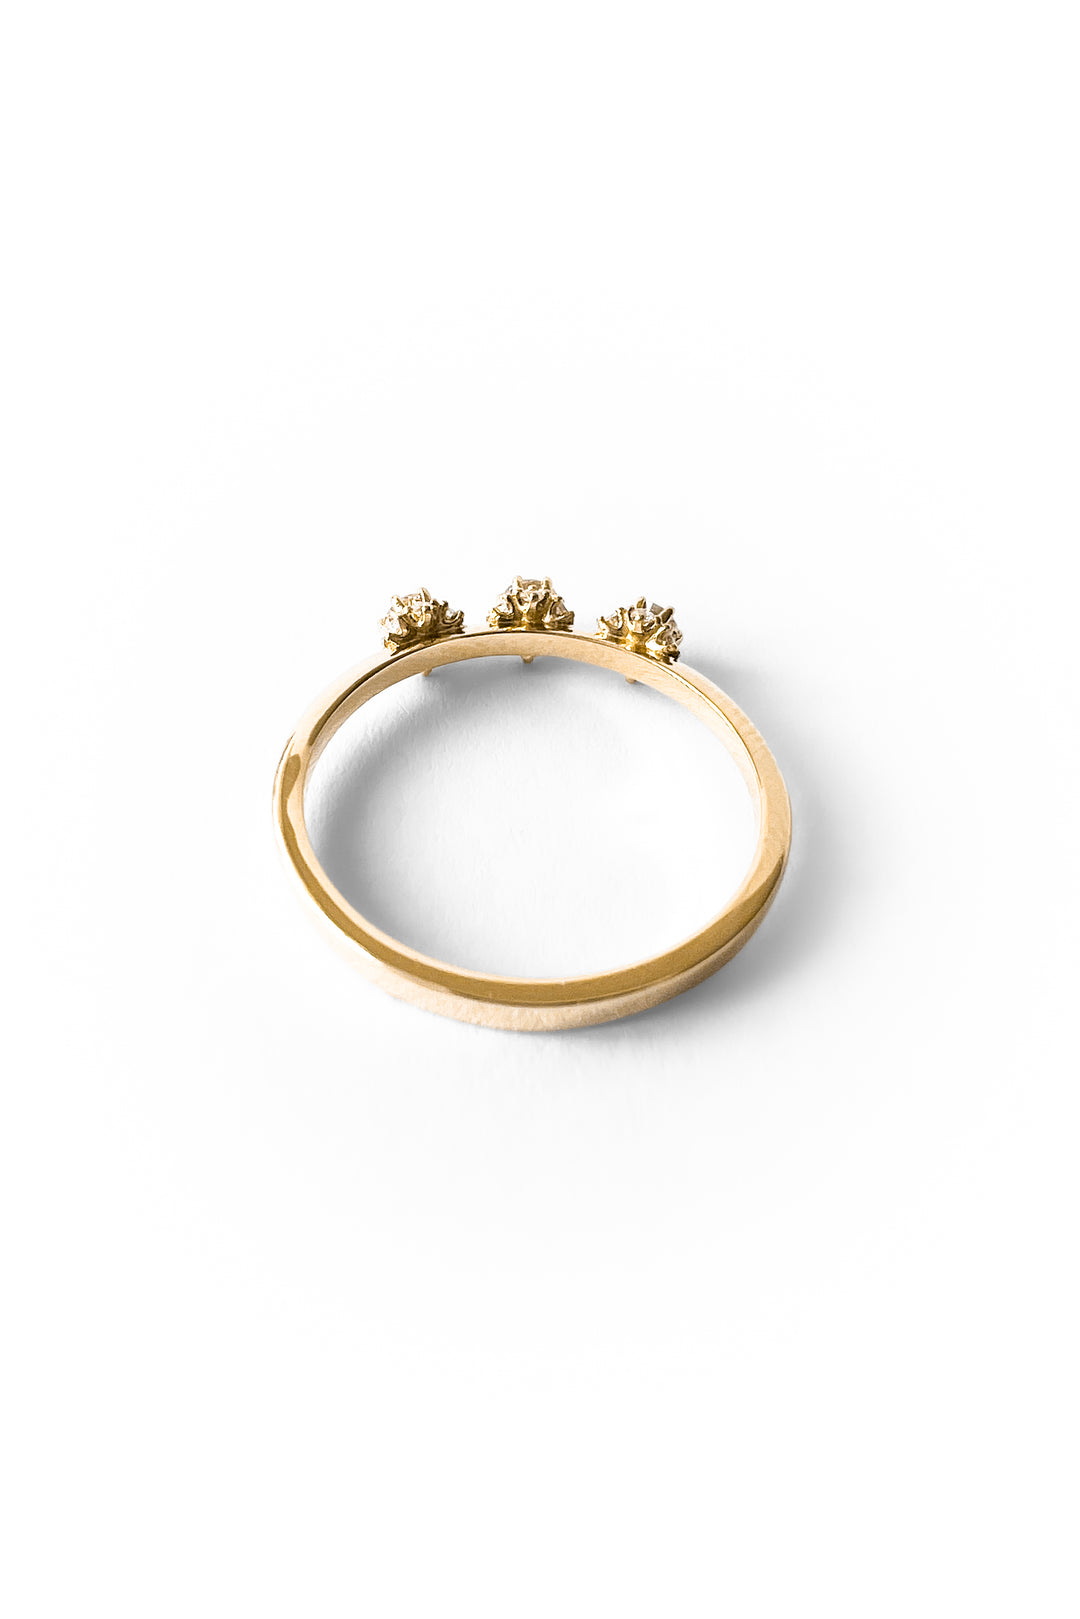 Trois Très-Or gold ring